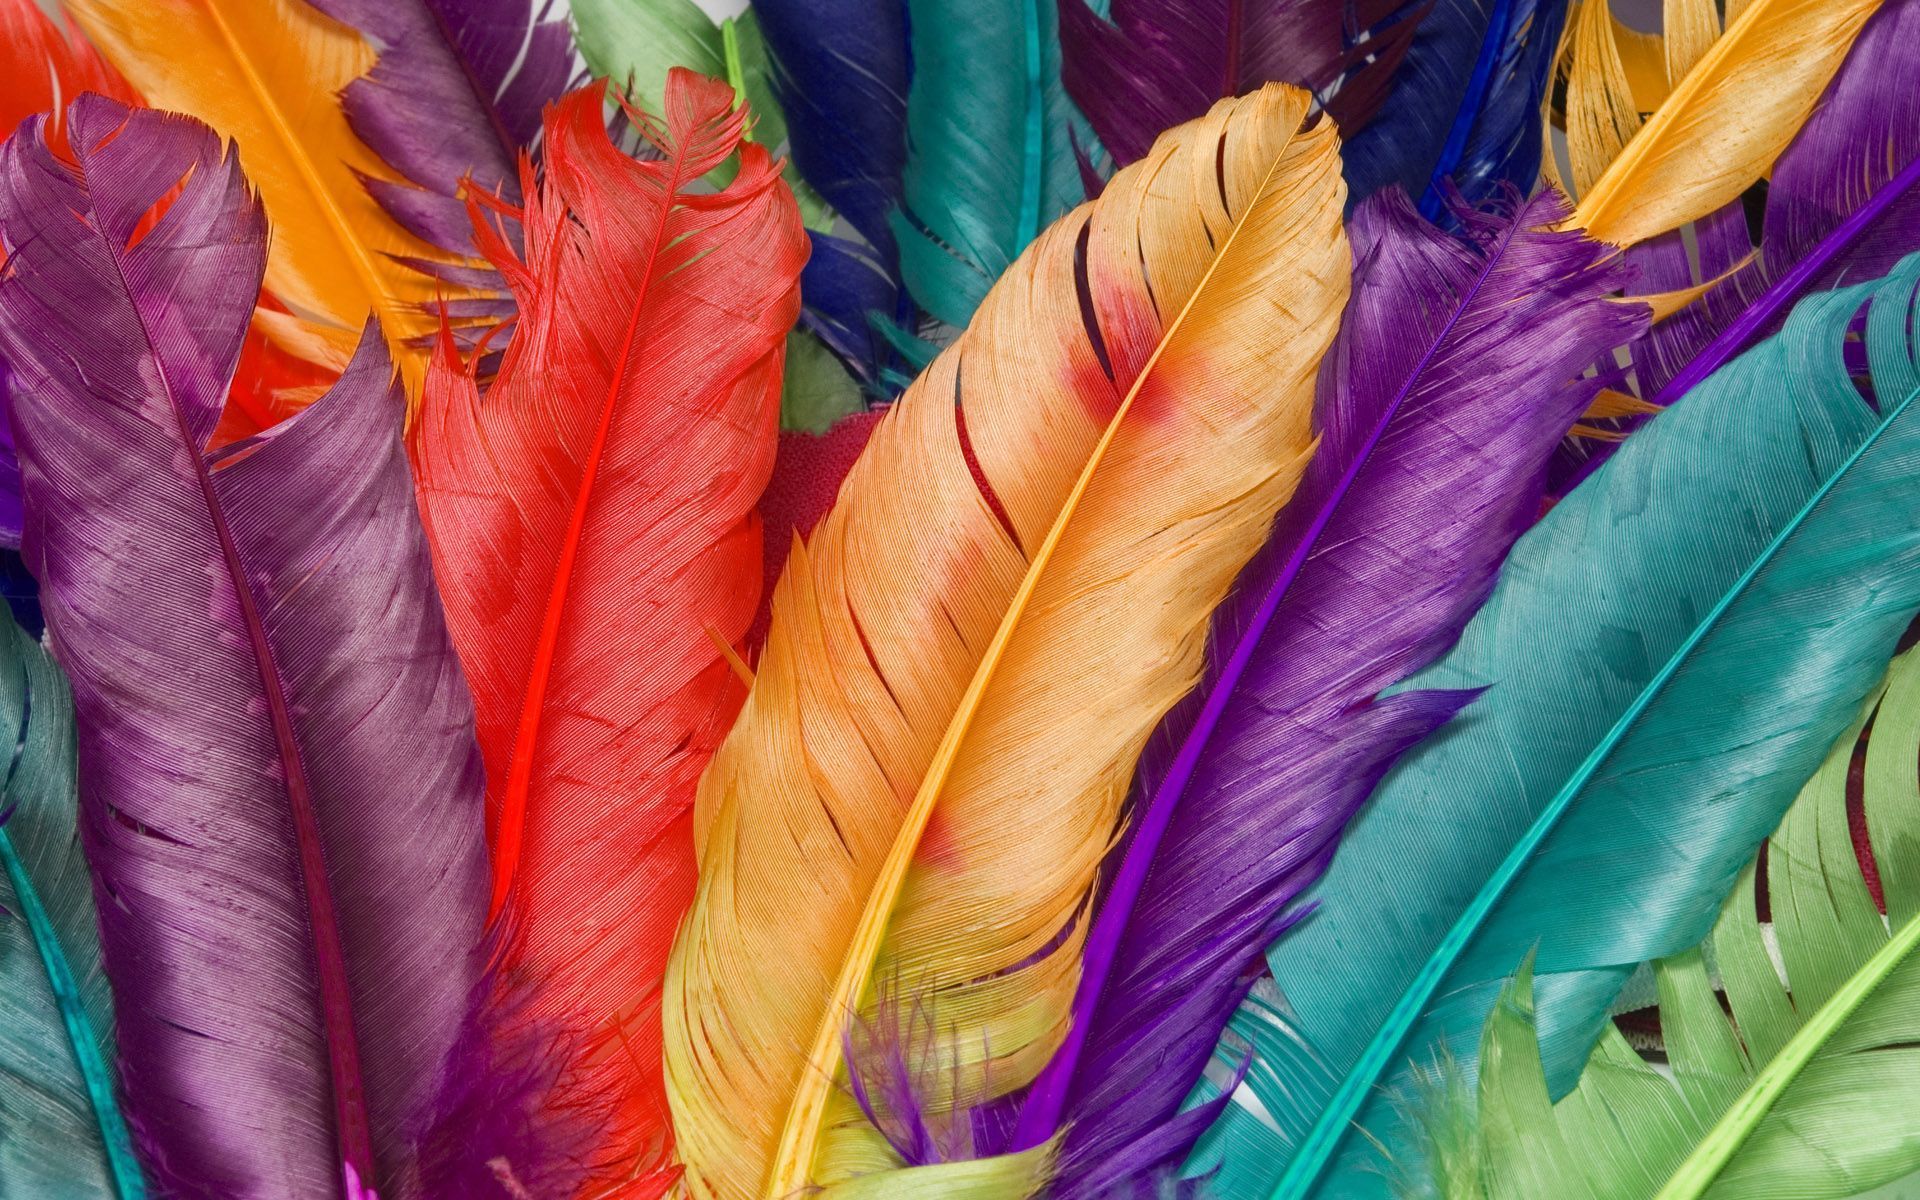 Feather Desktop Wallpaper, Feather Images Free, New Backgrounds